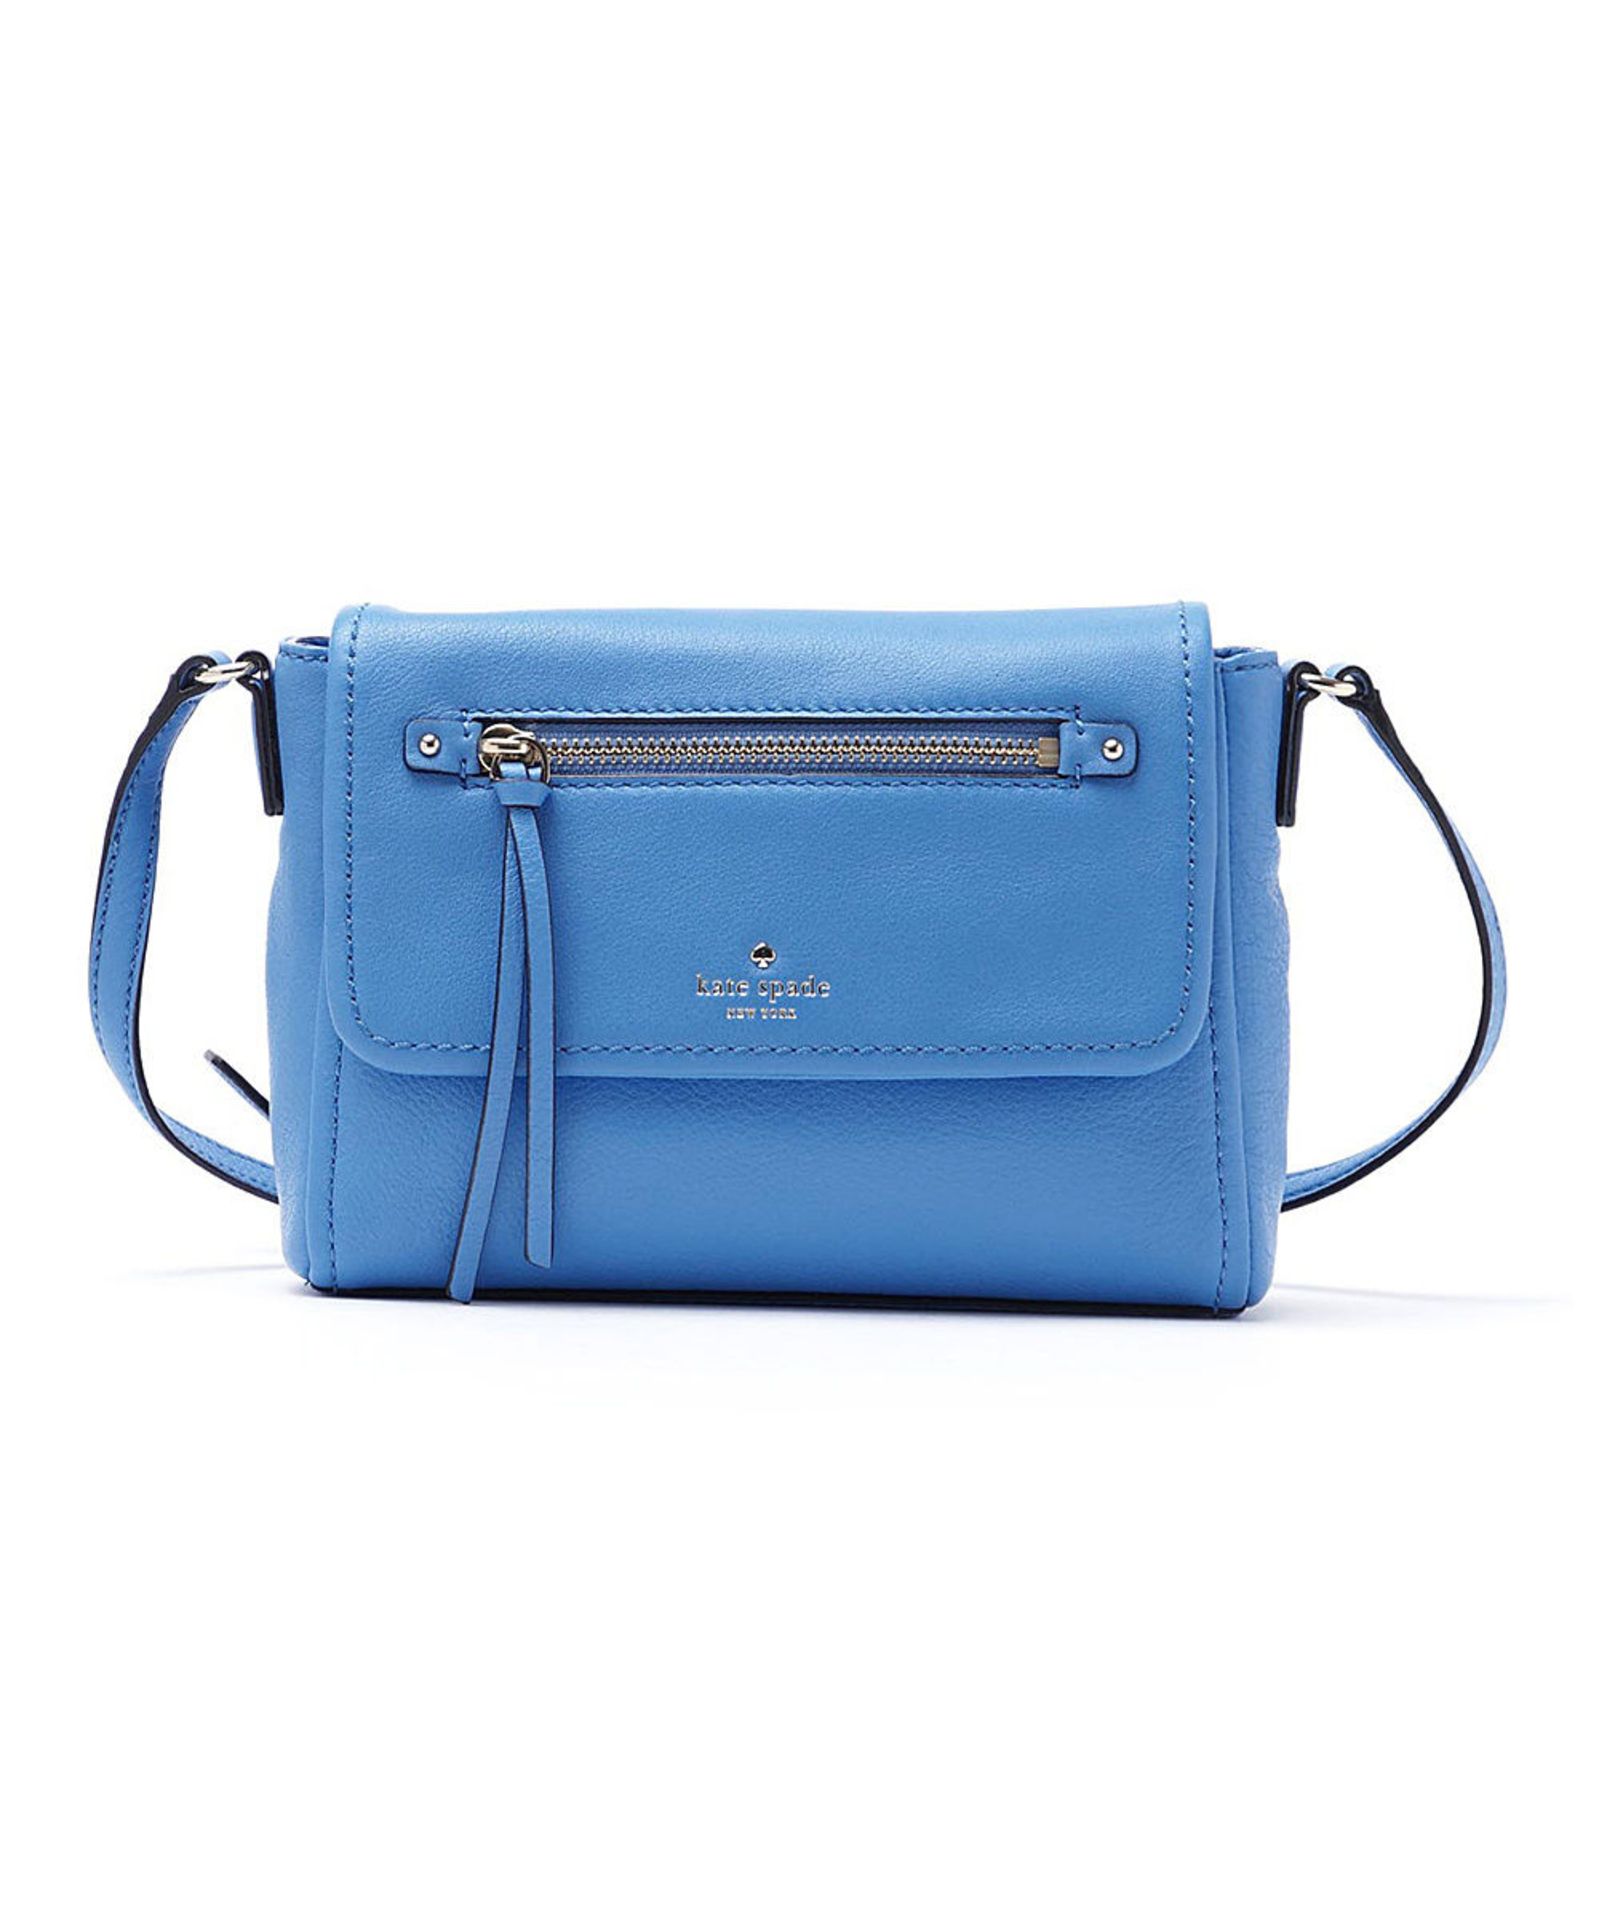 GENUINE KATE SPADE Alice Blue Toddy Leather Crossbody Bag (New with tags) [Ref: 46908823- T-63]